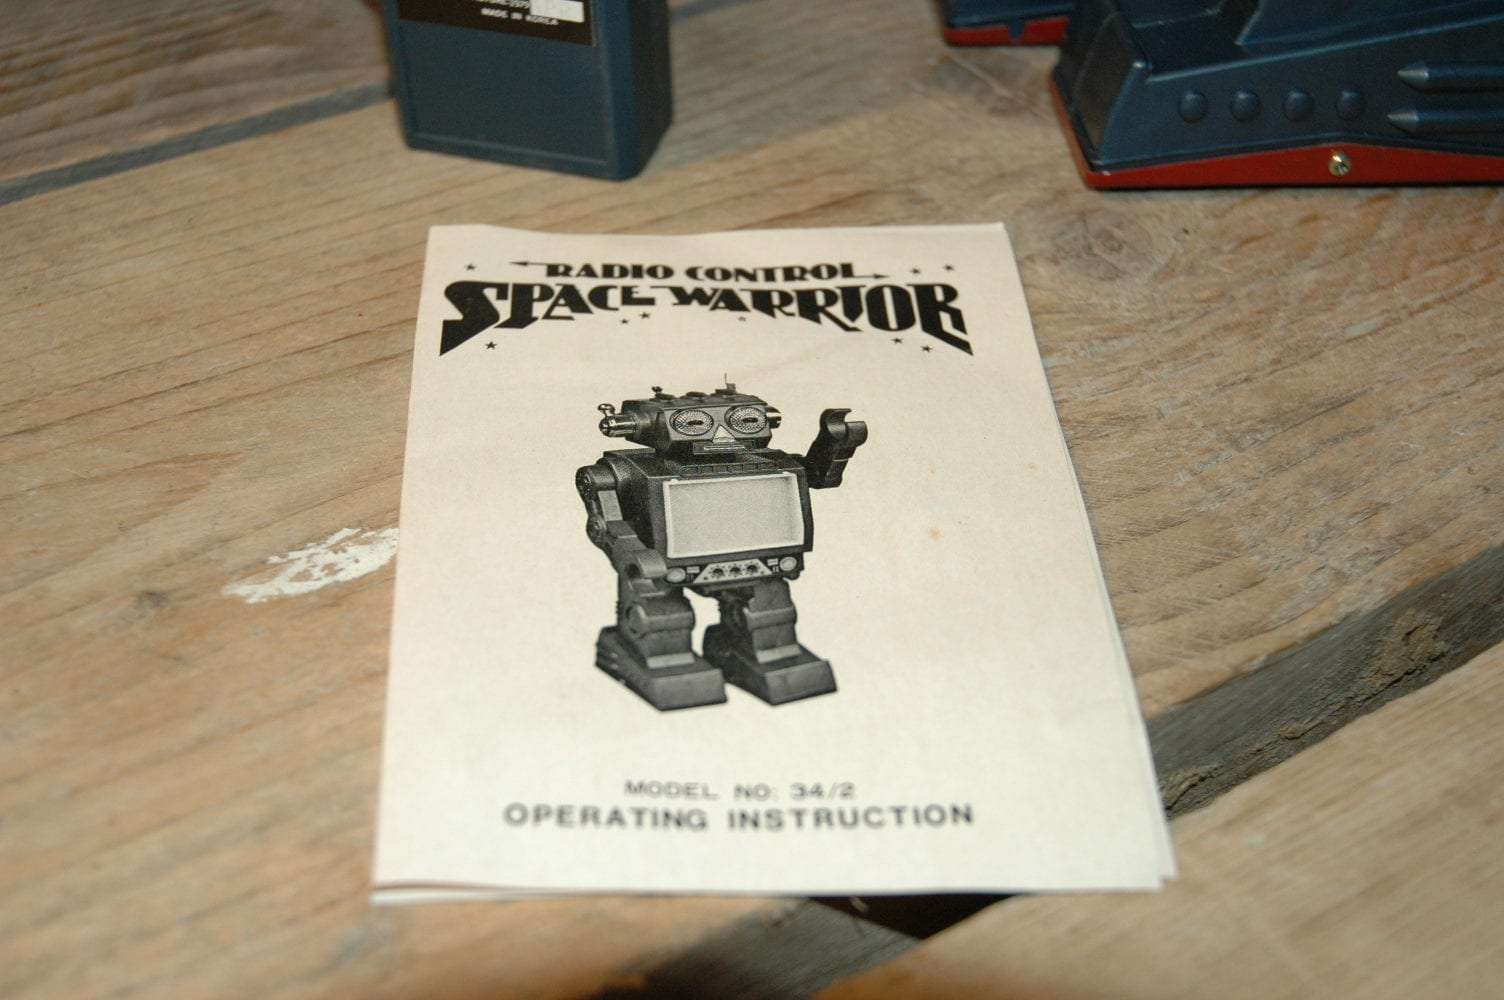 Straco - Radio Controlled Space Warrior